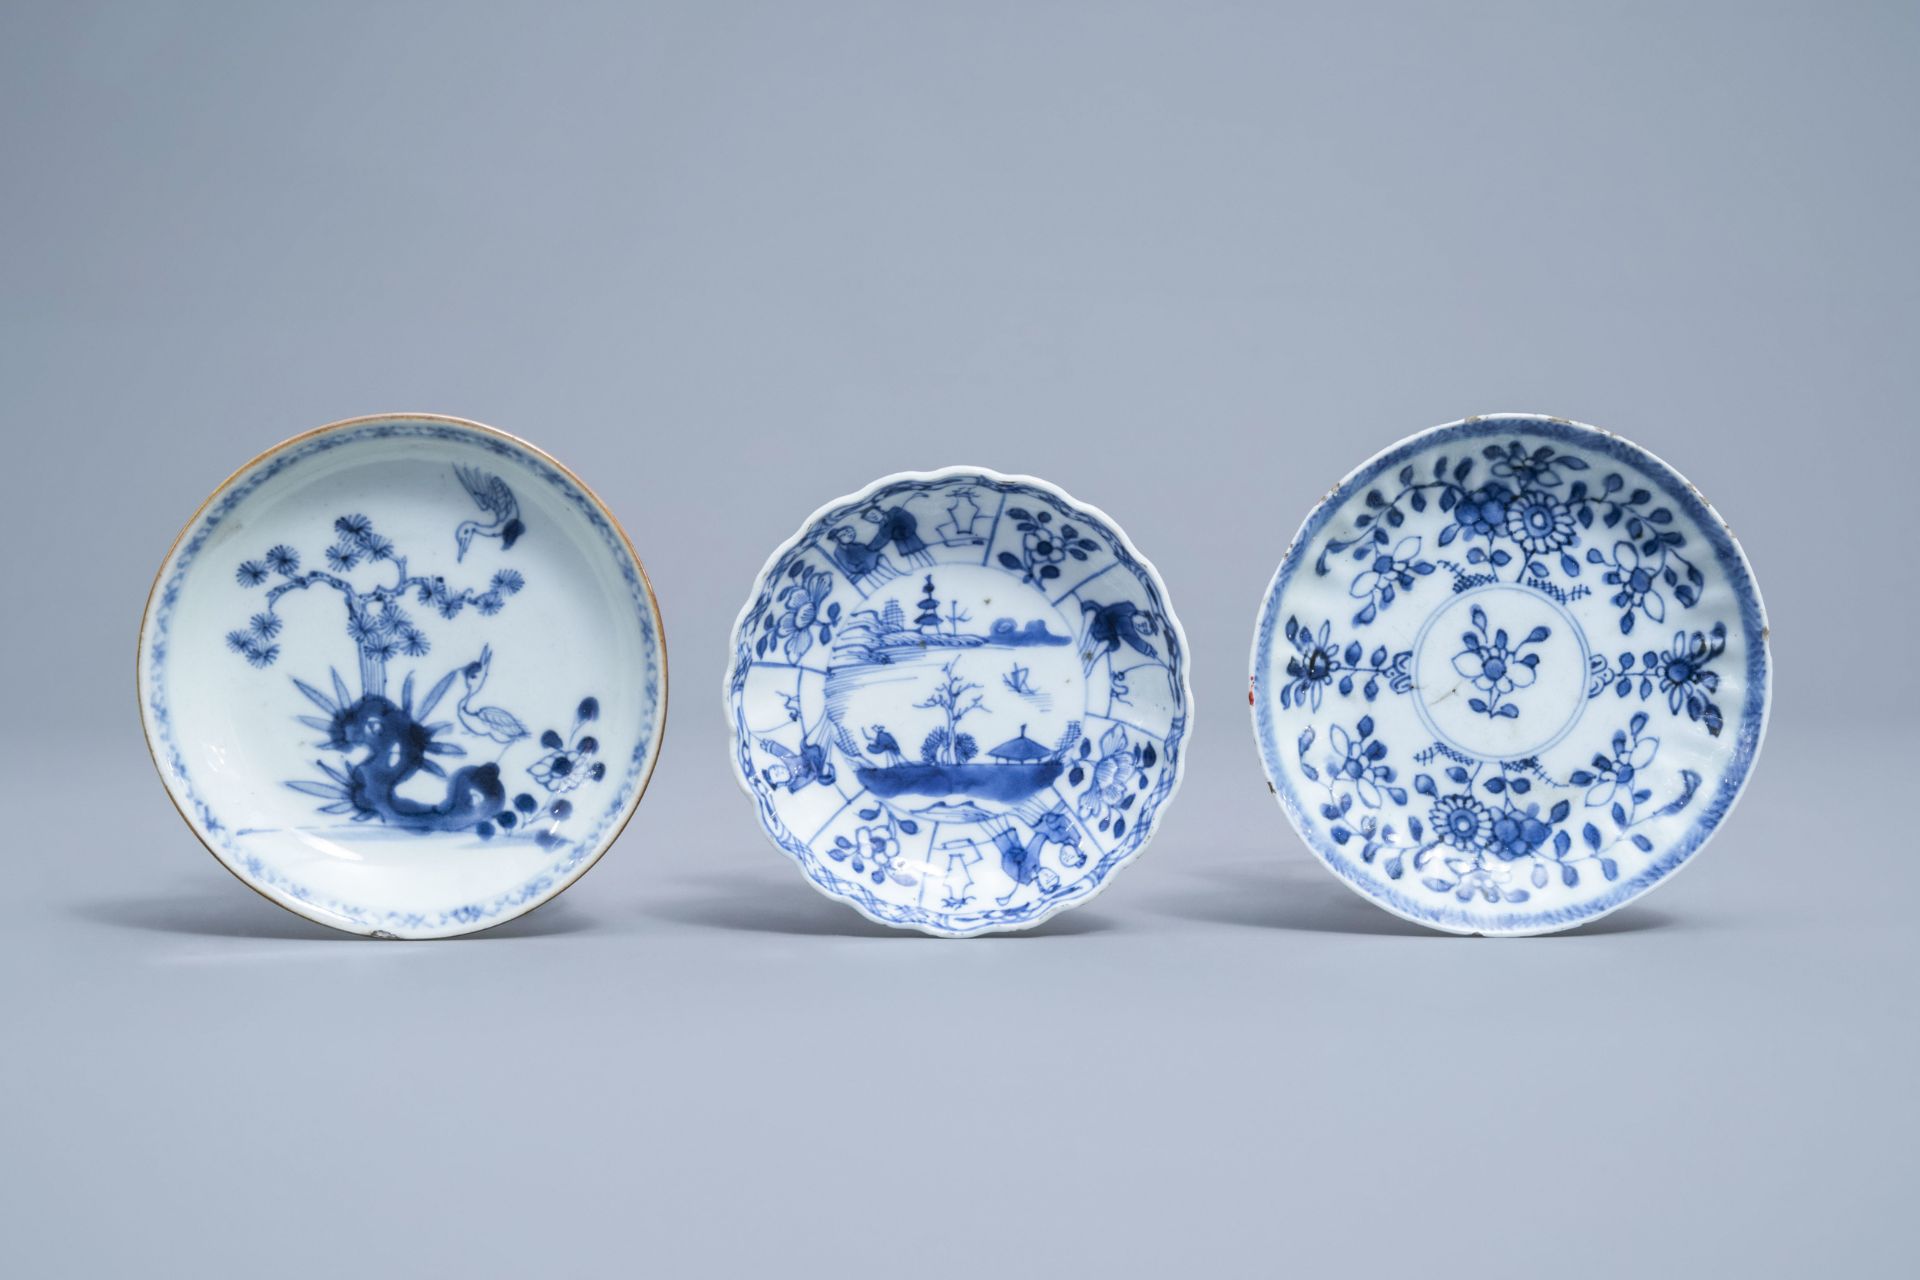 A varied collection of Chinese blue and white porcelain, 18th C. and later - Image 52 of 54